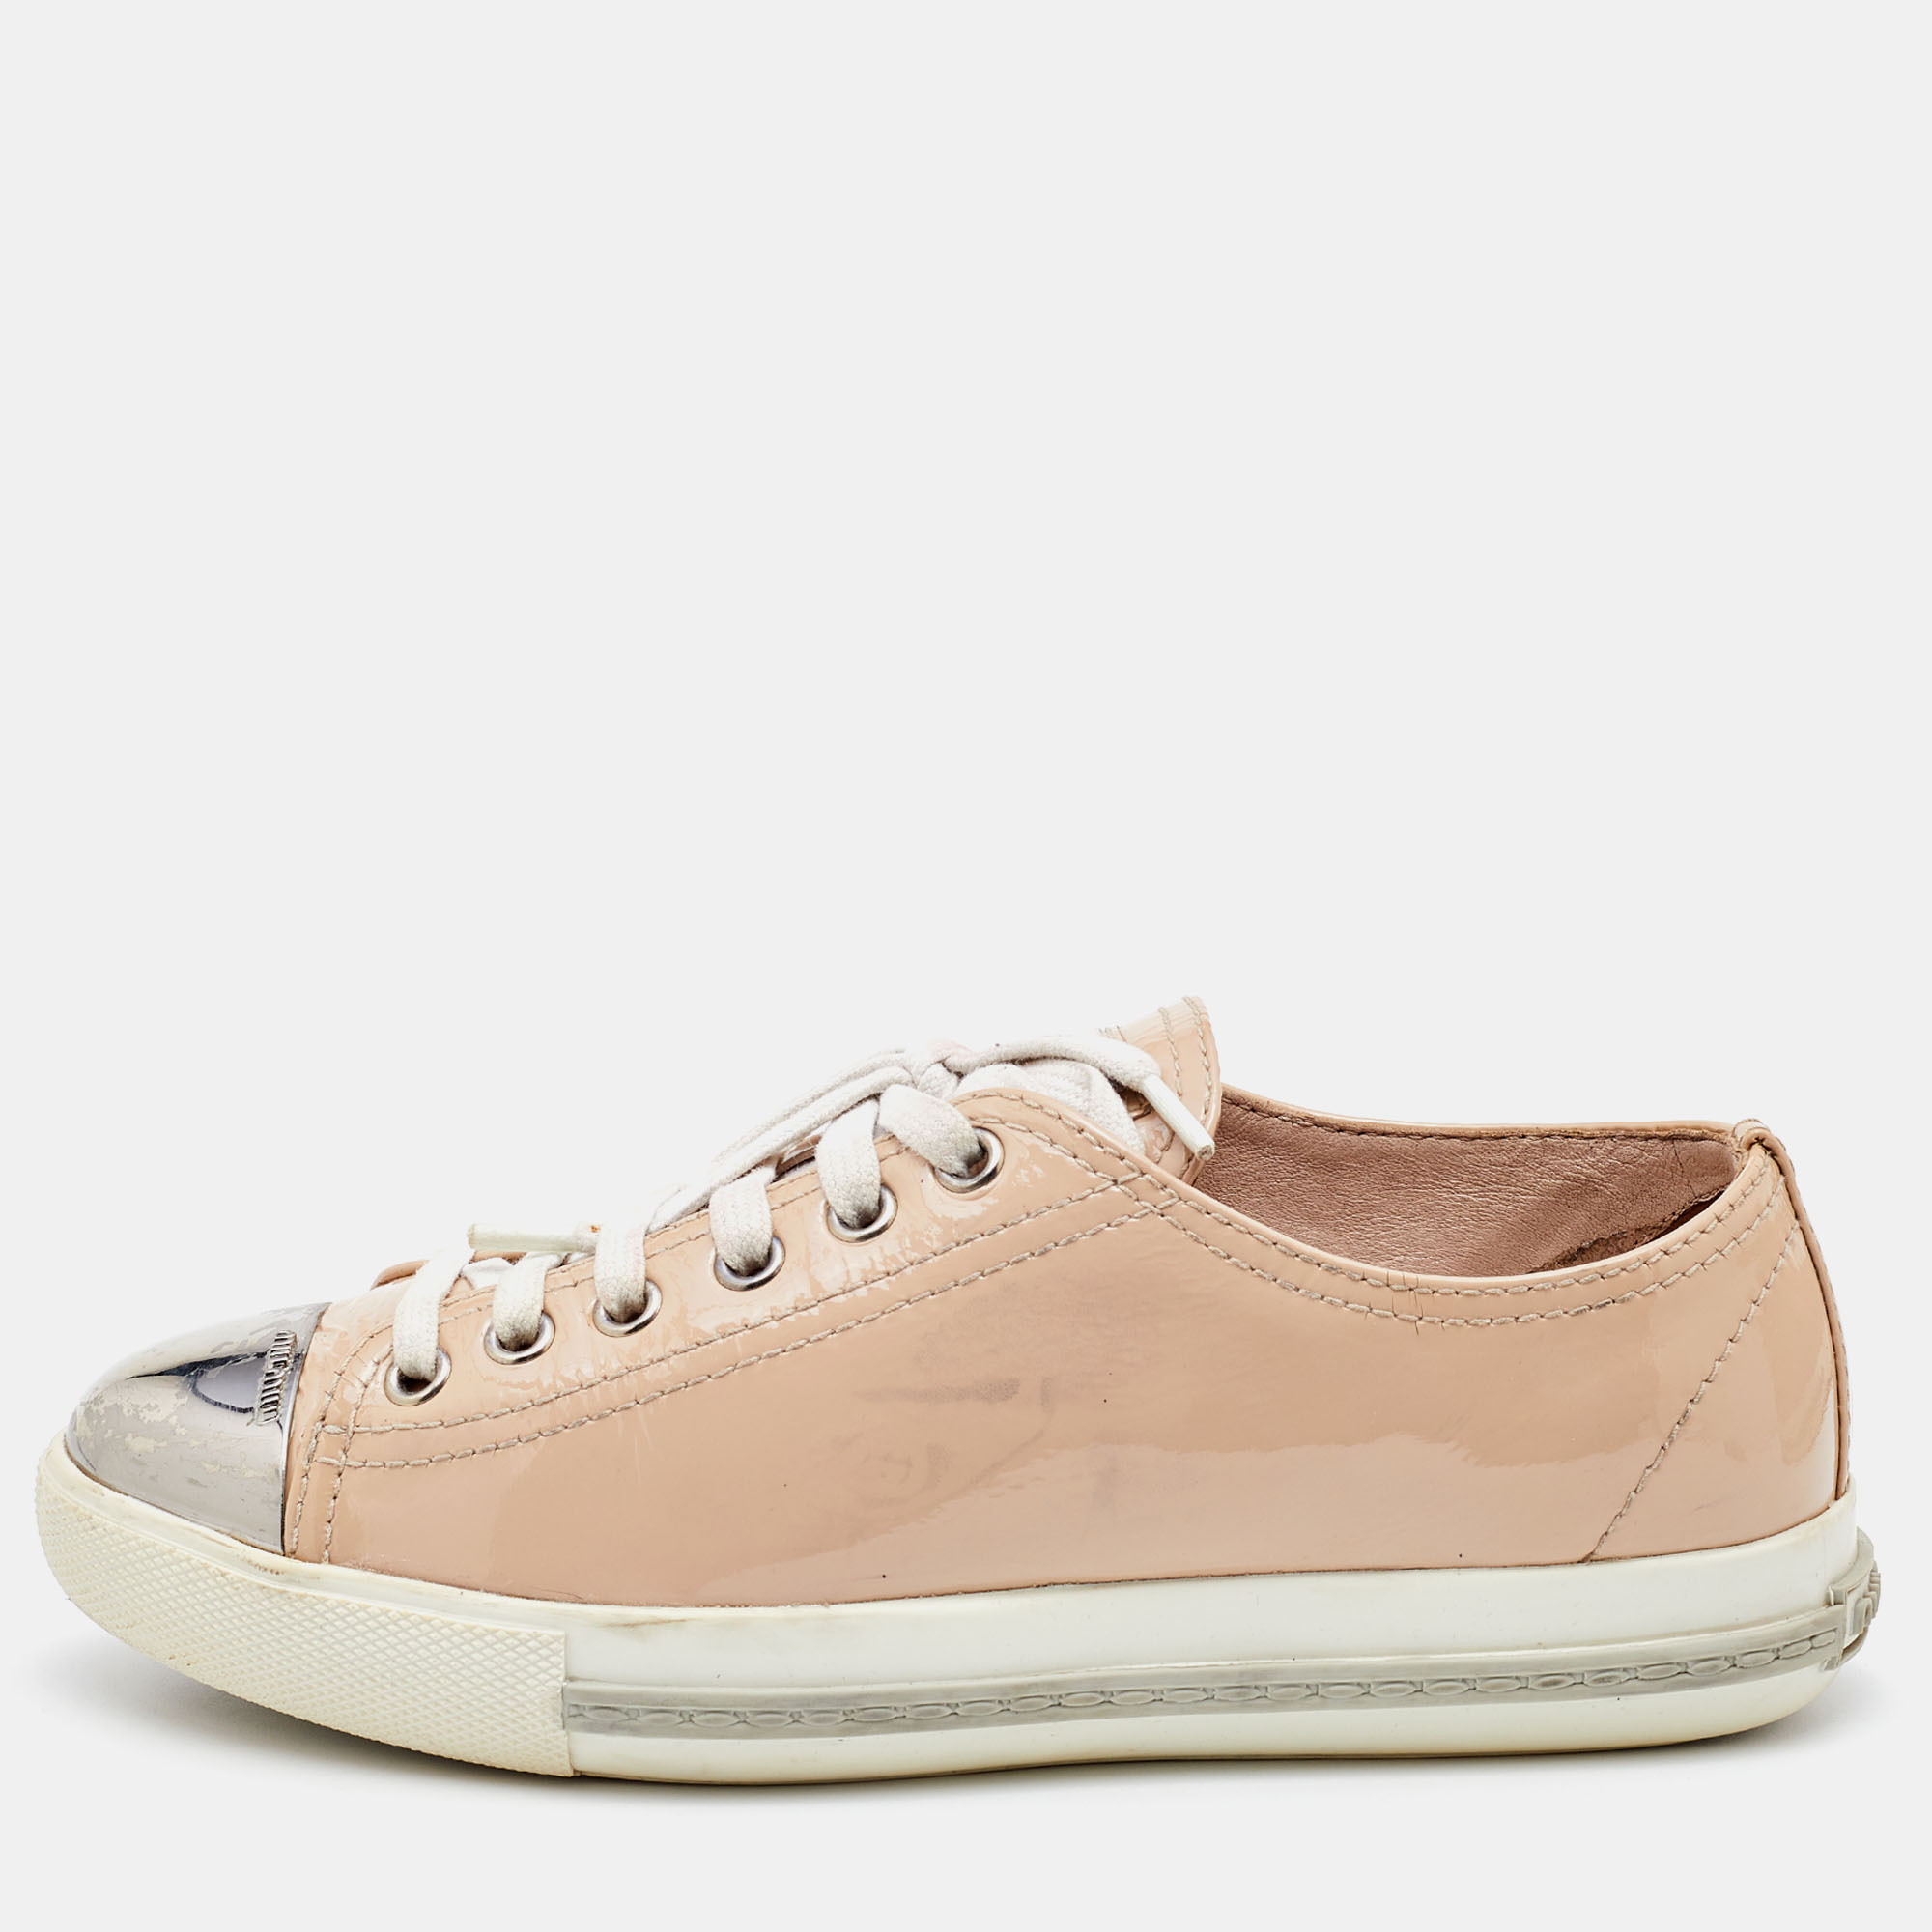 A signature Miu Miu style these low top sneakers for women are crafted in patent leather and detailed with metal hardware on the cap toes. They are secured with lace ups and set on durable rubber soles.